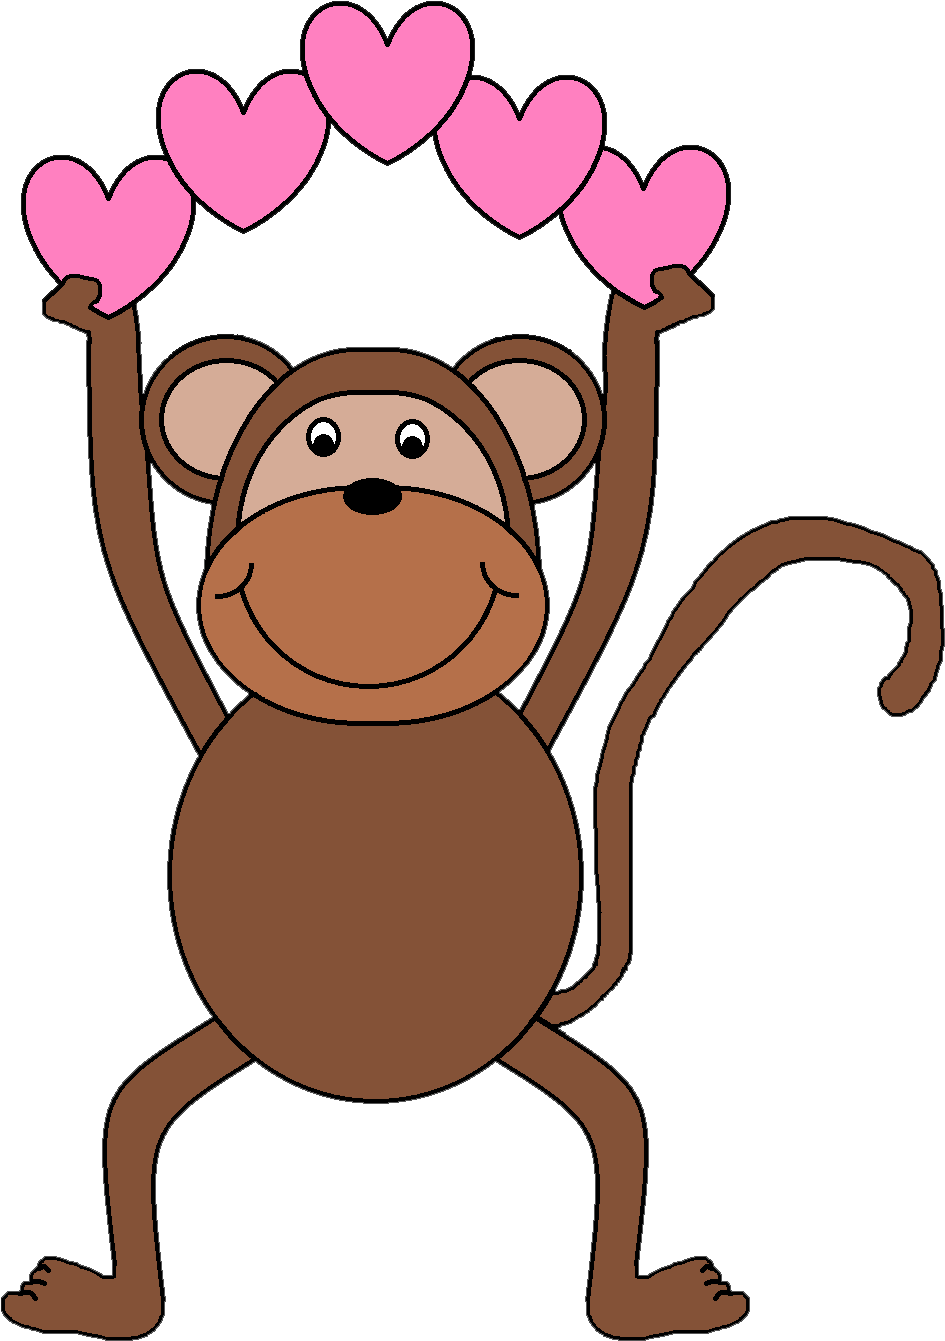 Download The Files Here - Monkey Clipart (952x1361)